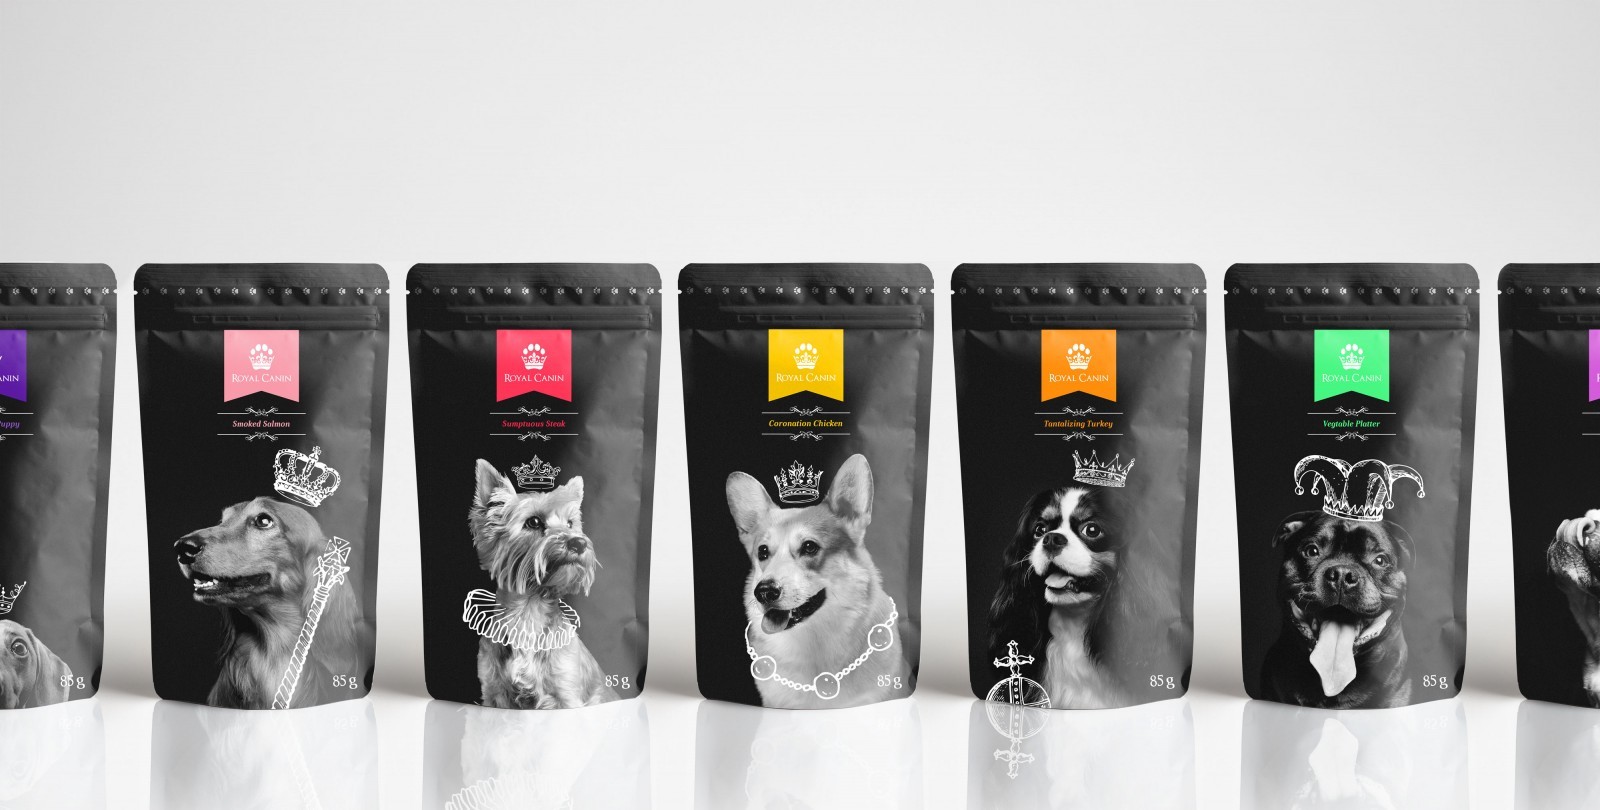 Redesign Concept for Royal Canin Pet Food Brand by Thomas Hardwick